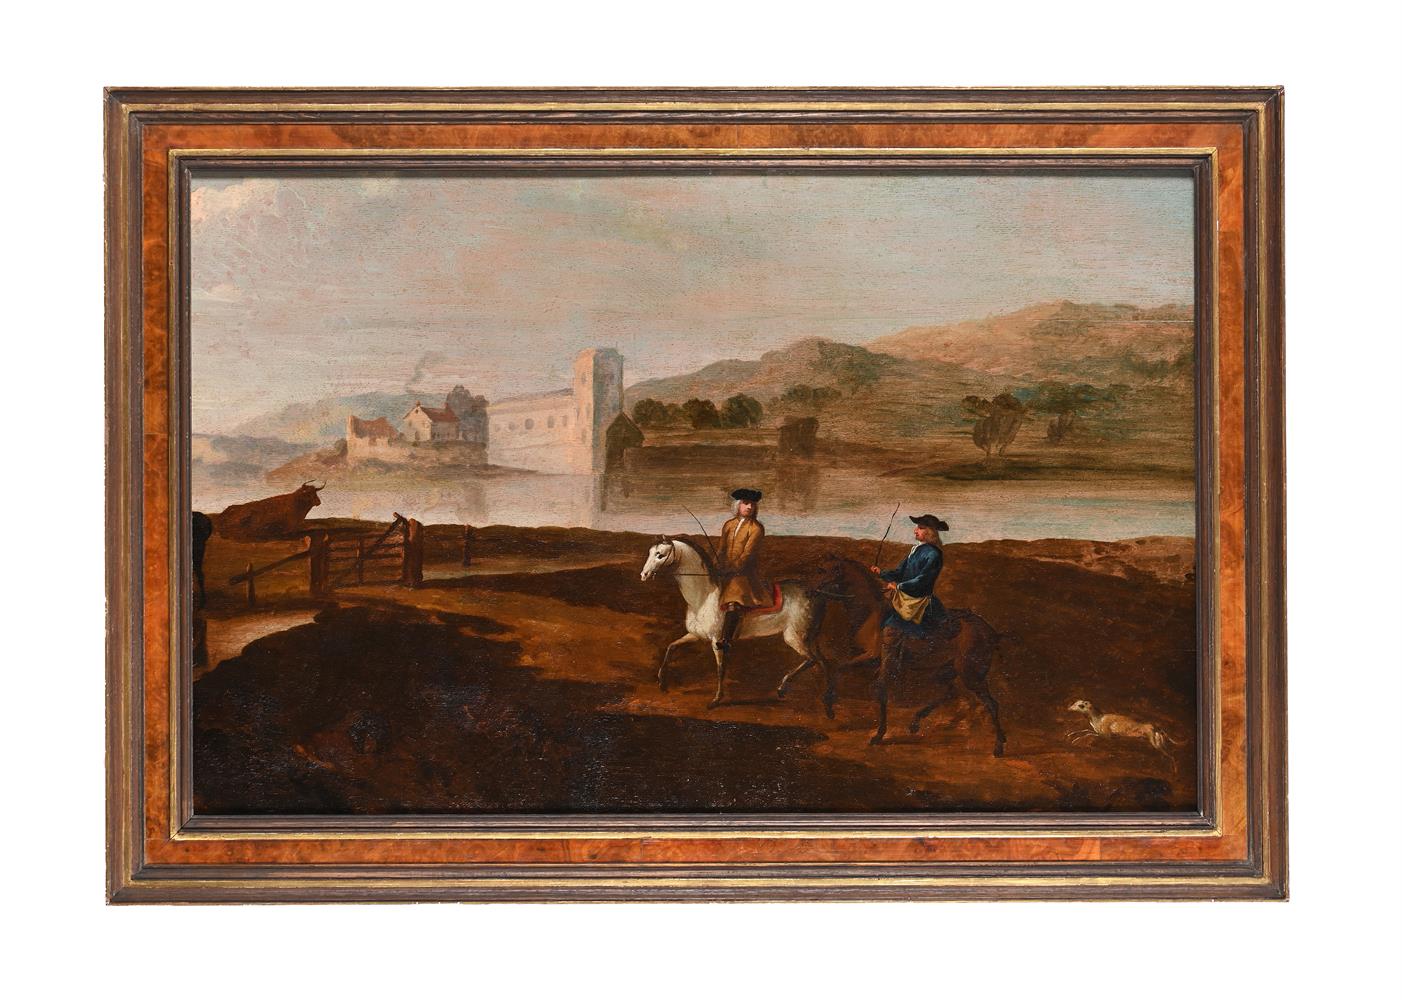 FOLLOWER OF PETER TILLEMANS, WILLIAM STONE ESQ RIDING IN A LANDSCAPE - Image 2 of 3